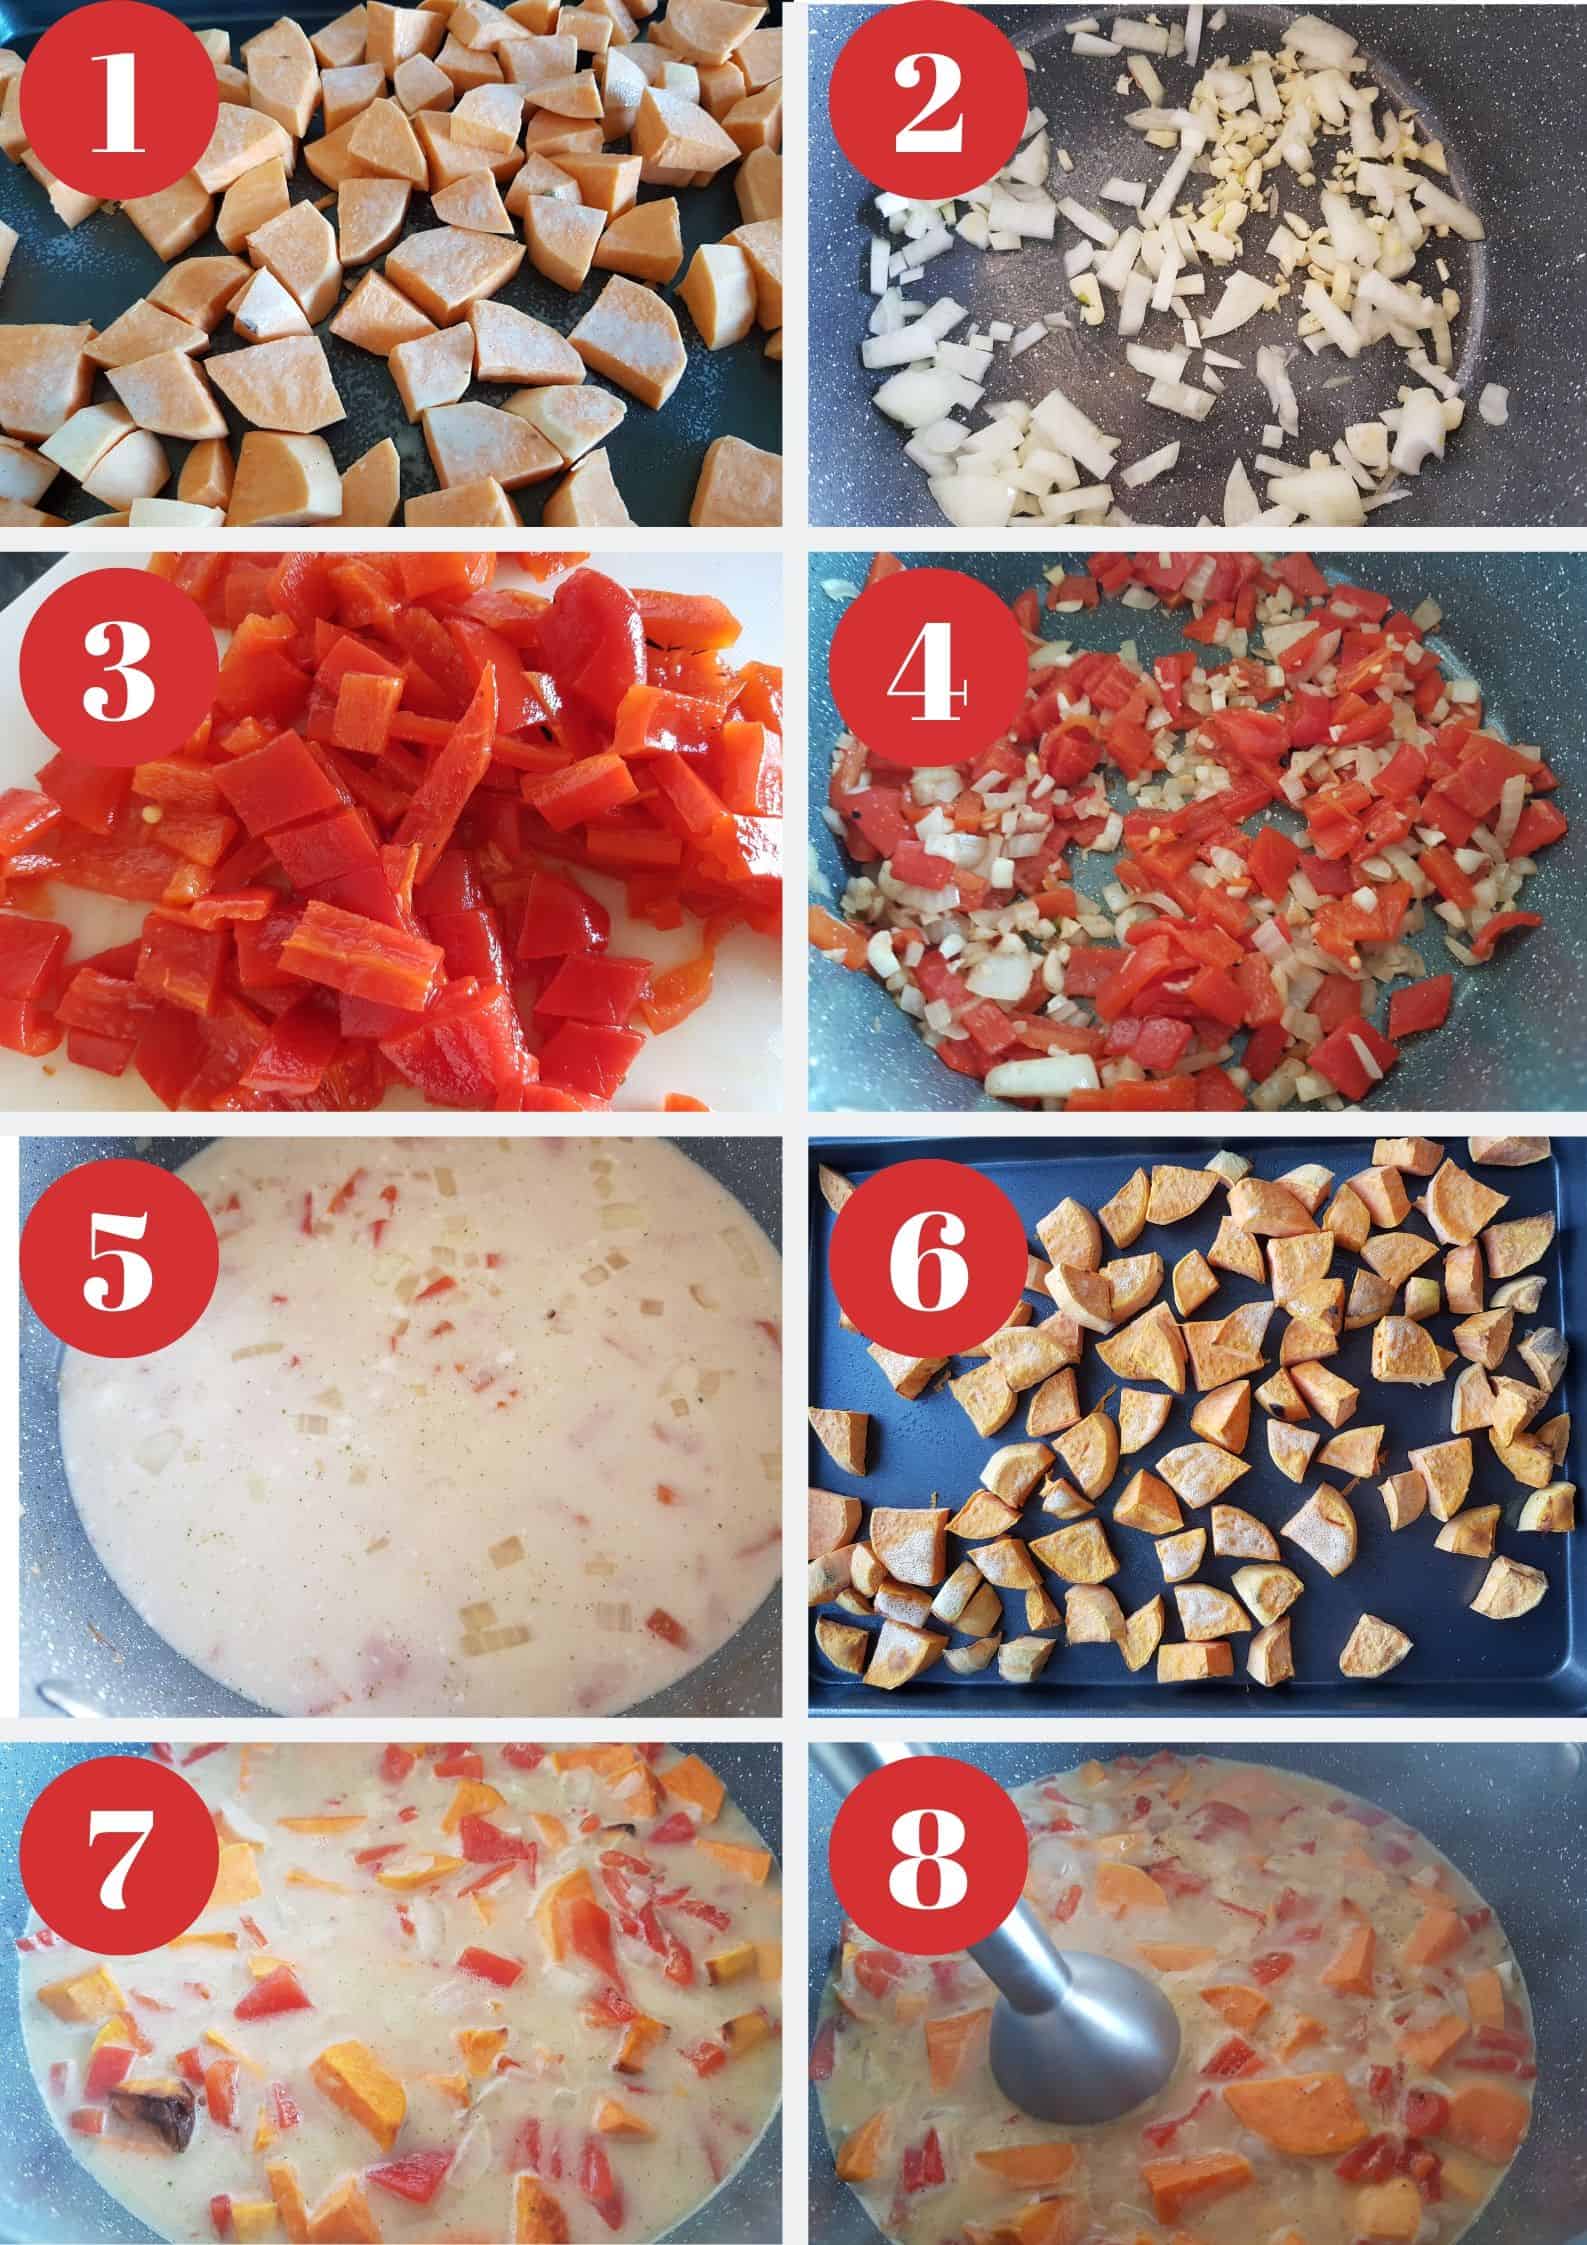 Infographic showing how to make roasted red pepper and sweet potato soup.